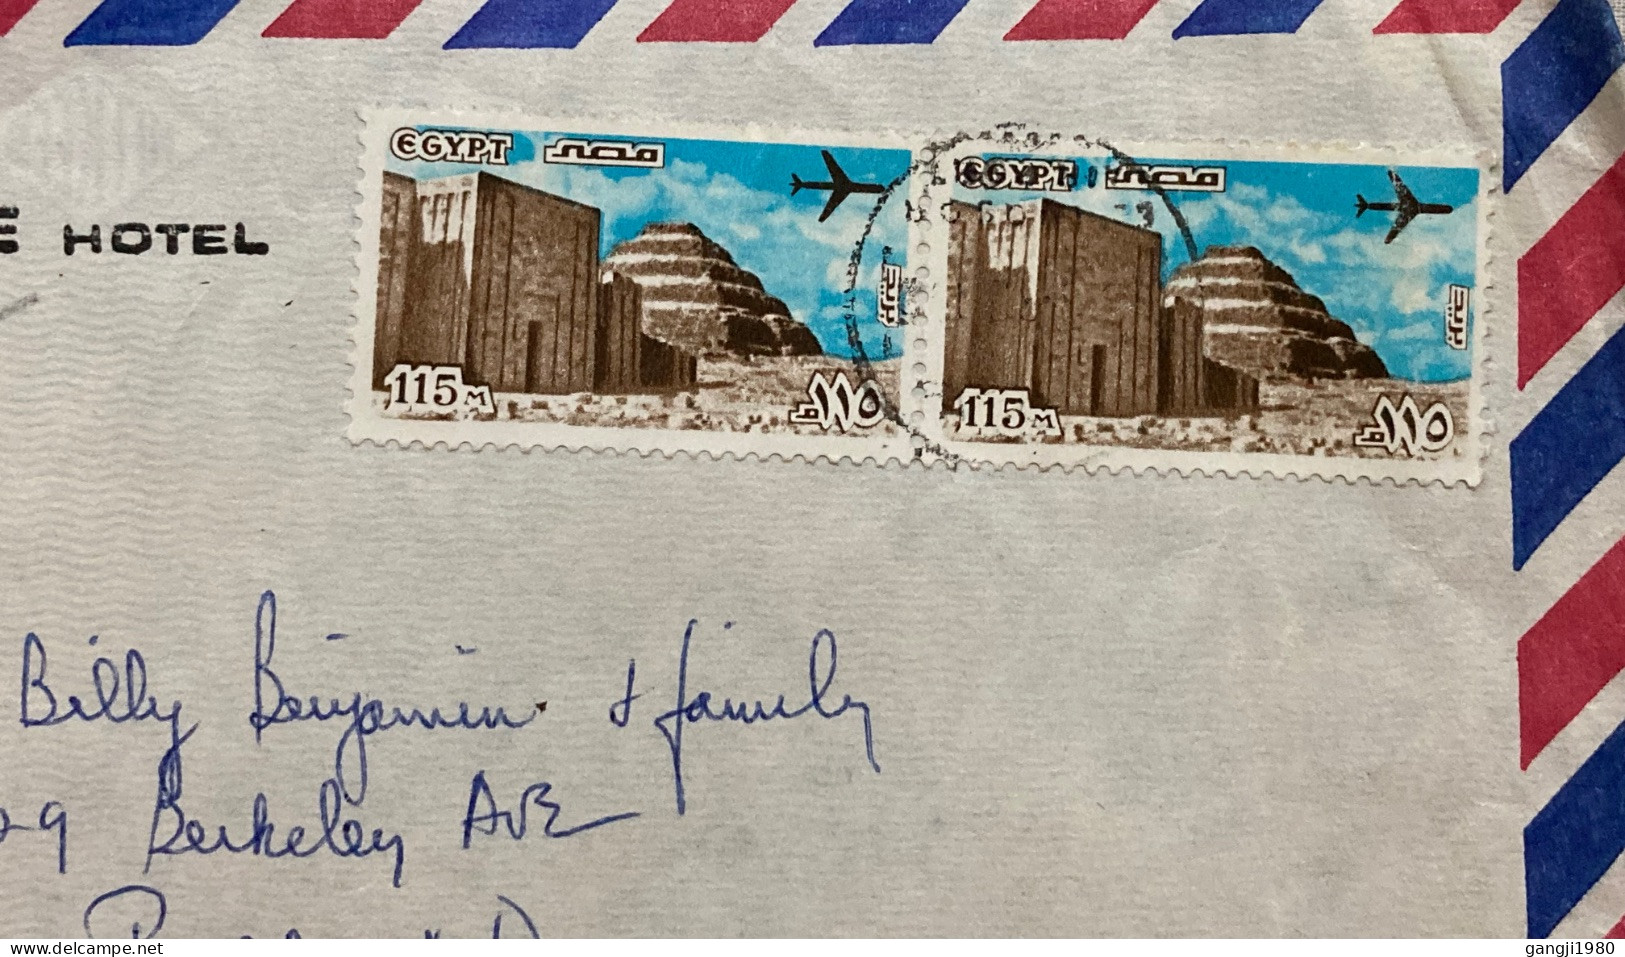 EGYPT 1980, COVER USED TO USA, NEW WINTER PALACE HOTEL, LUXOR, 2 STAMP, PYRAMID, AEROPLANE, ARCHELOGY, BUILDING, HERITAG - Covers & Documents